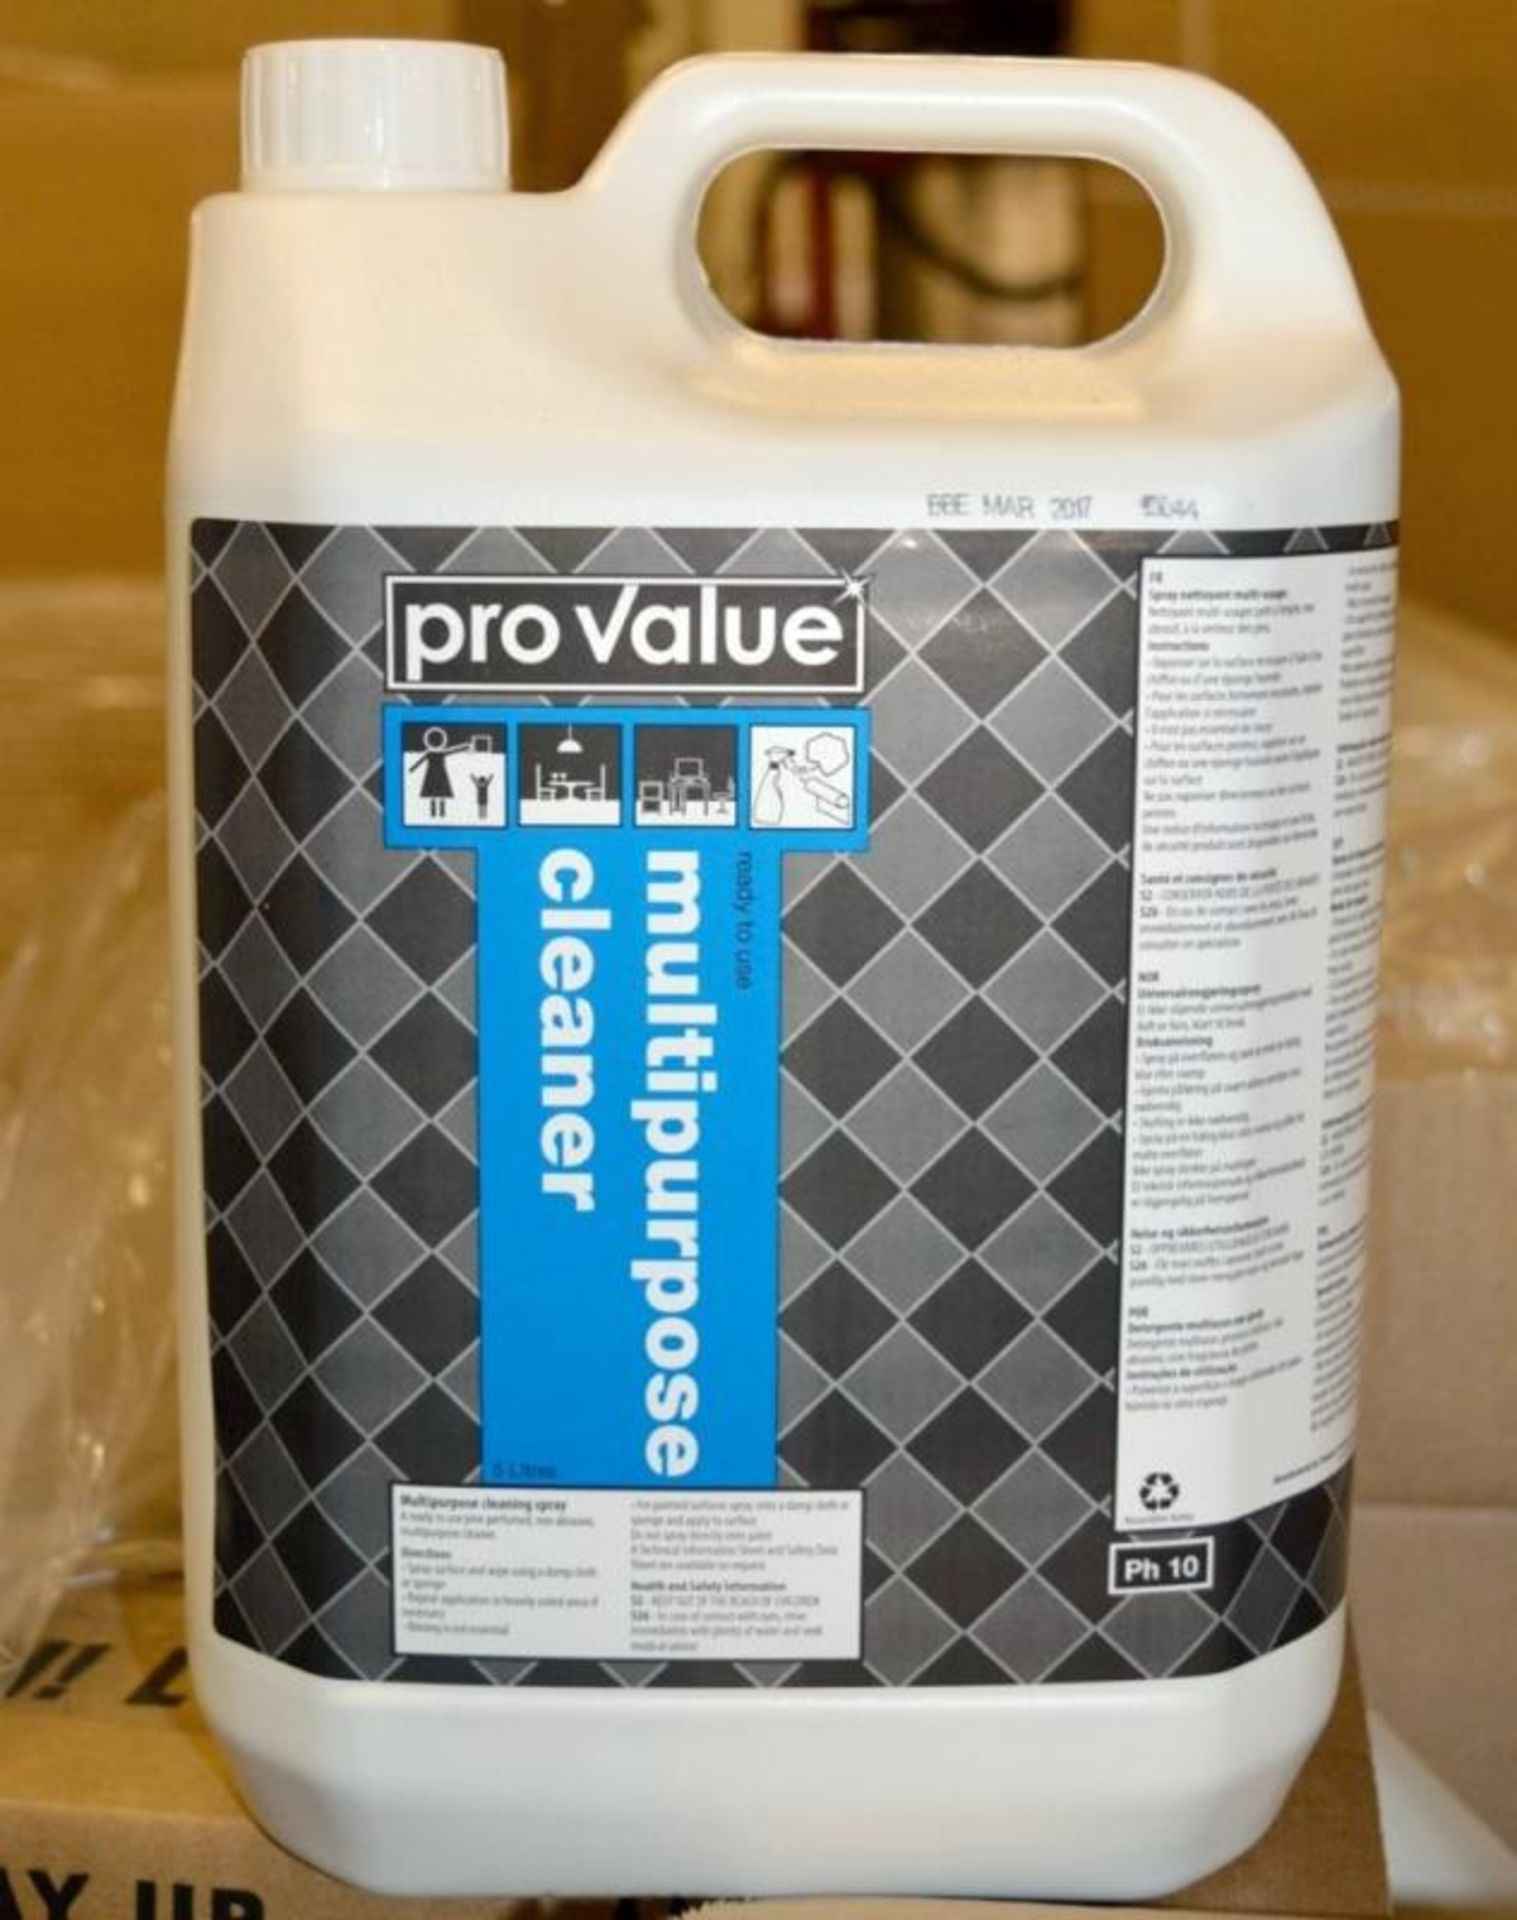 10 x Pro Value Multipurpose Cleaner - A Ready To Use Pine Scented, Non Abrasive Cleaner - Includes